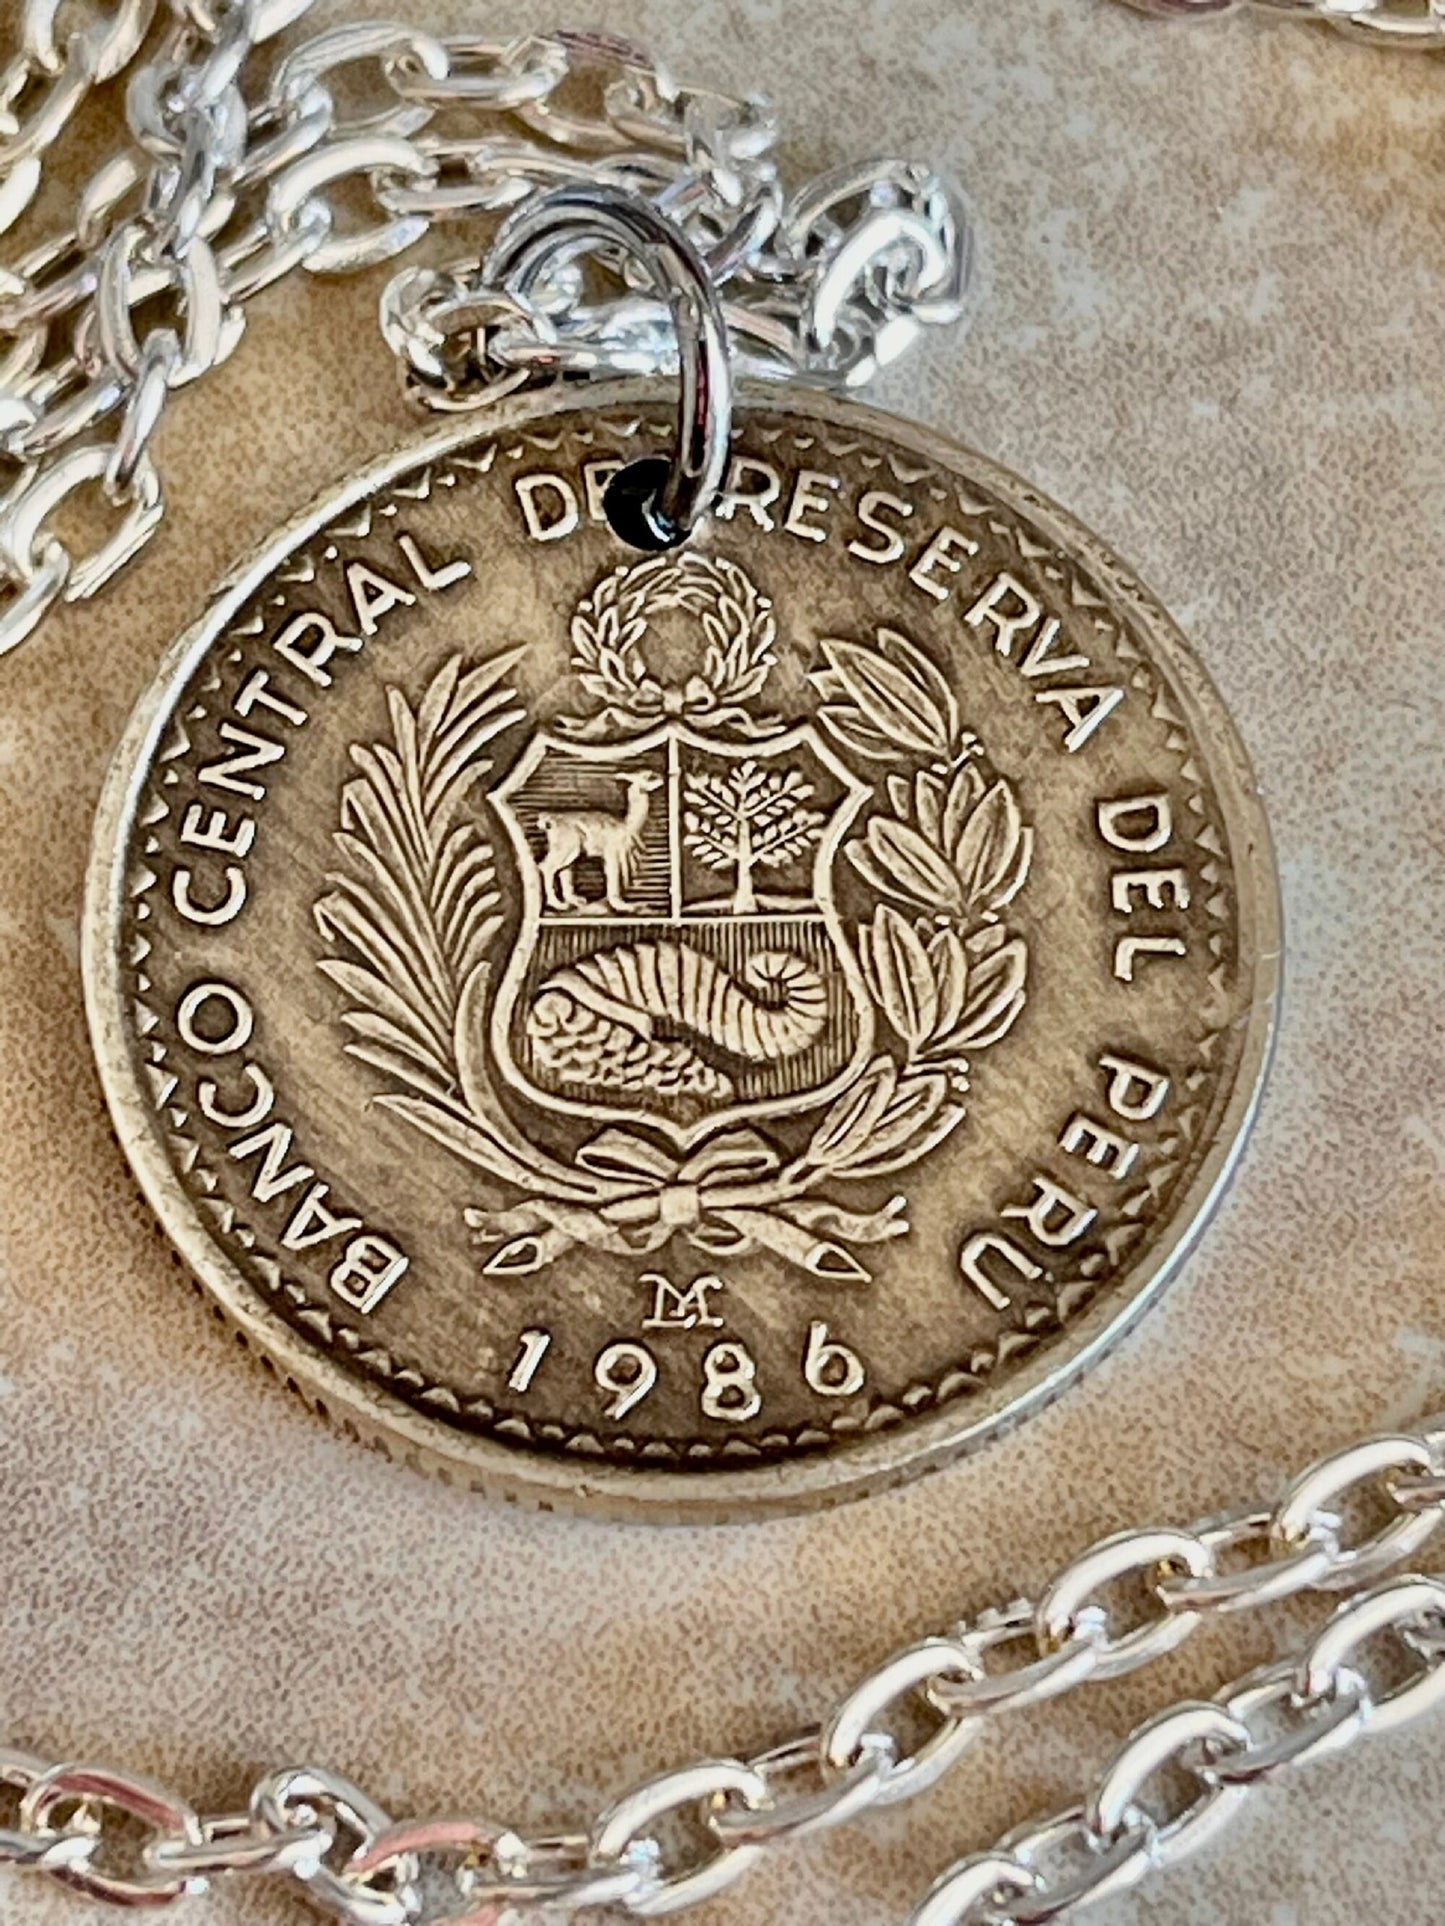 Peru Coin Pendant Peruvian 5 Cinco Intis Personal Necklace Old Vintage Handmade Jewelry Gift Friend Charm For Him Her World Coin Collector